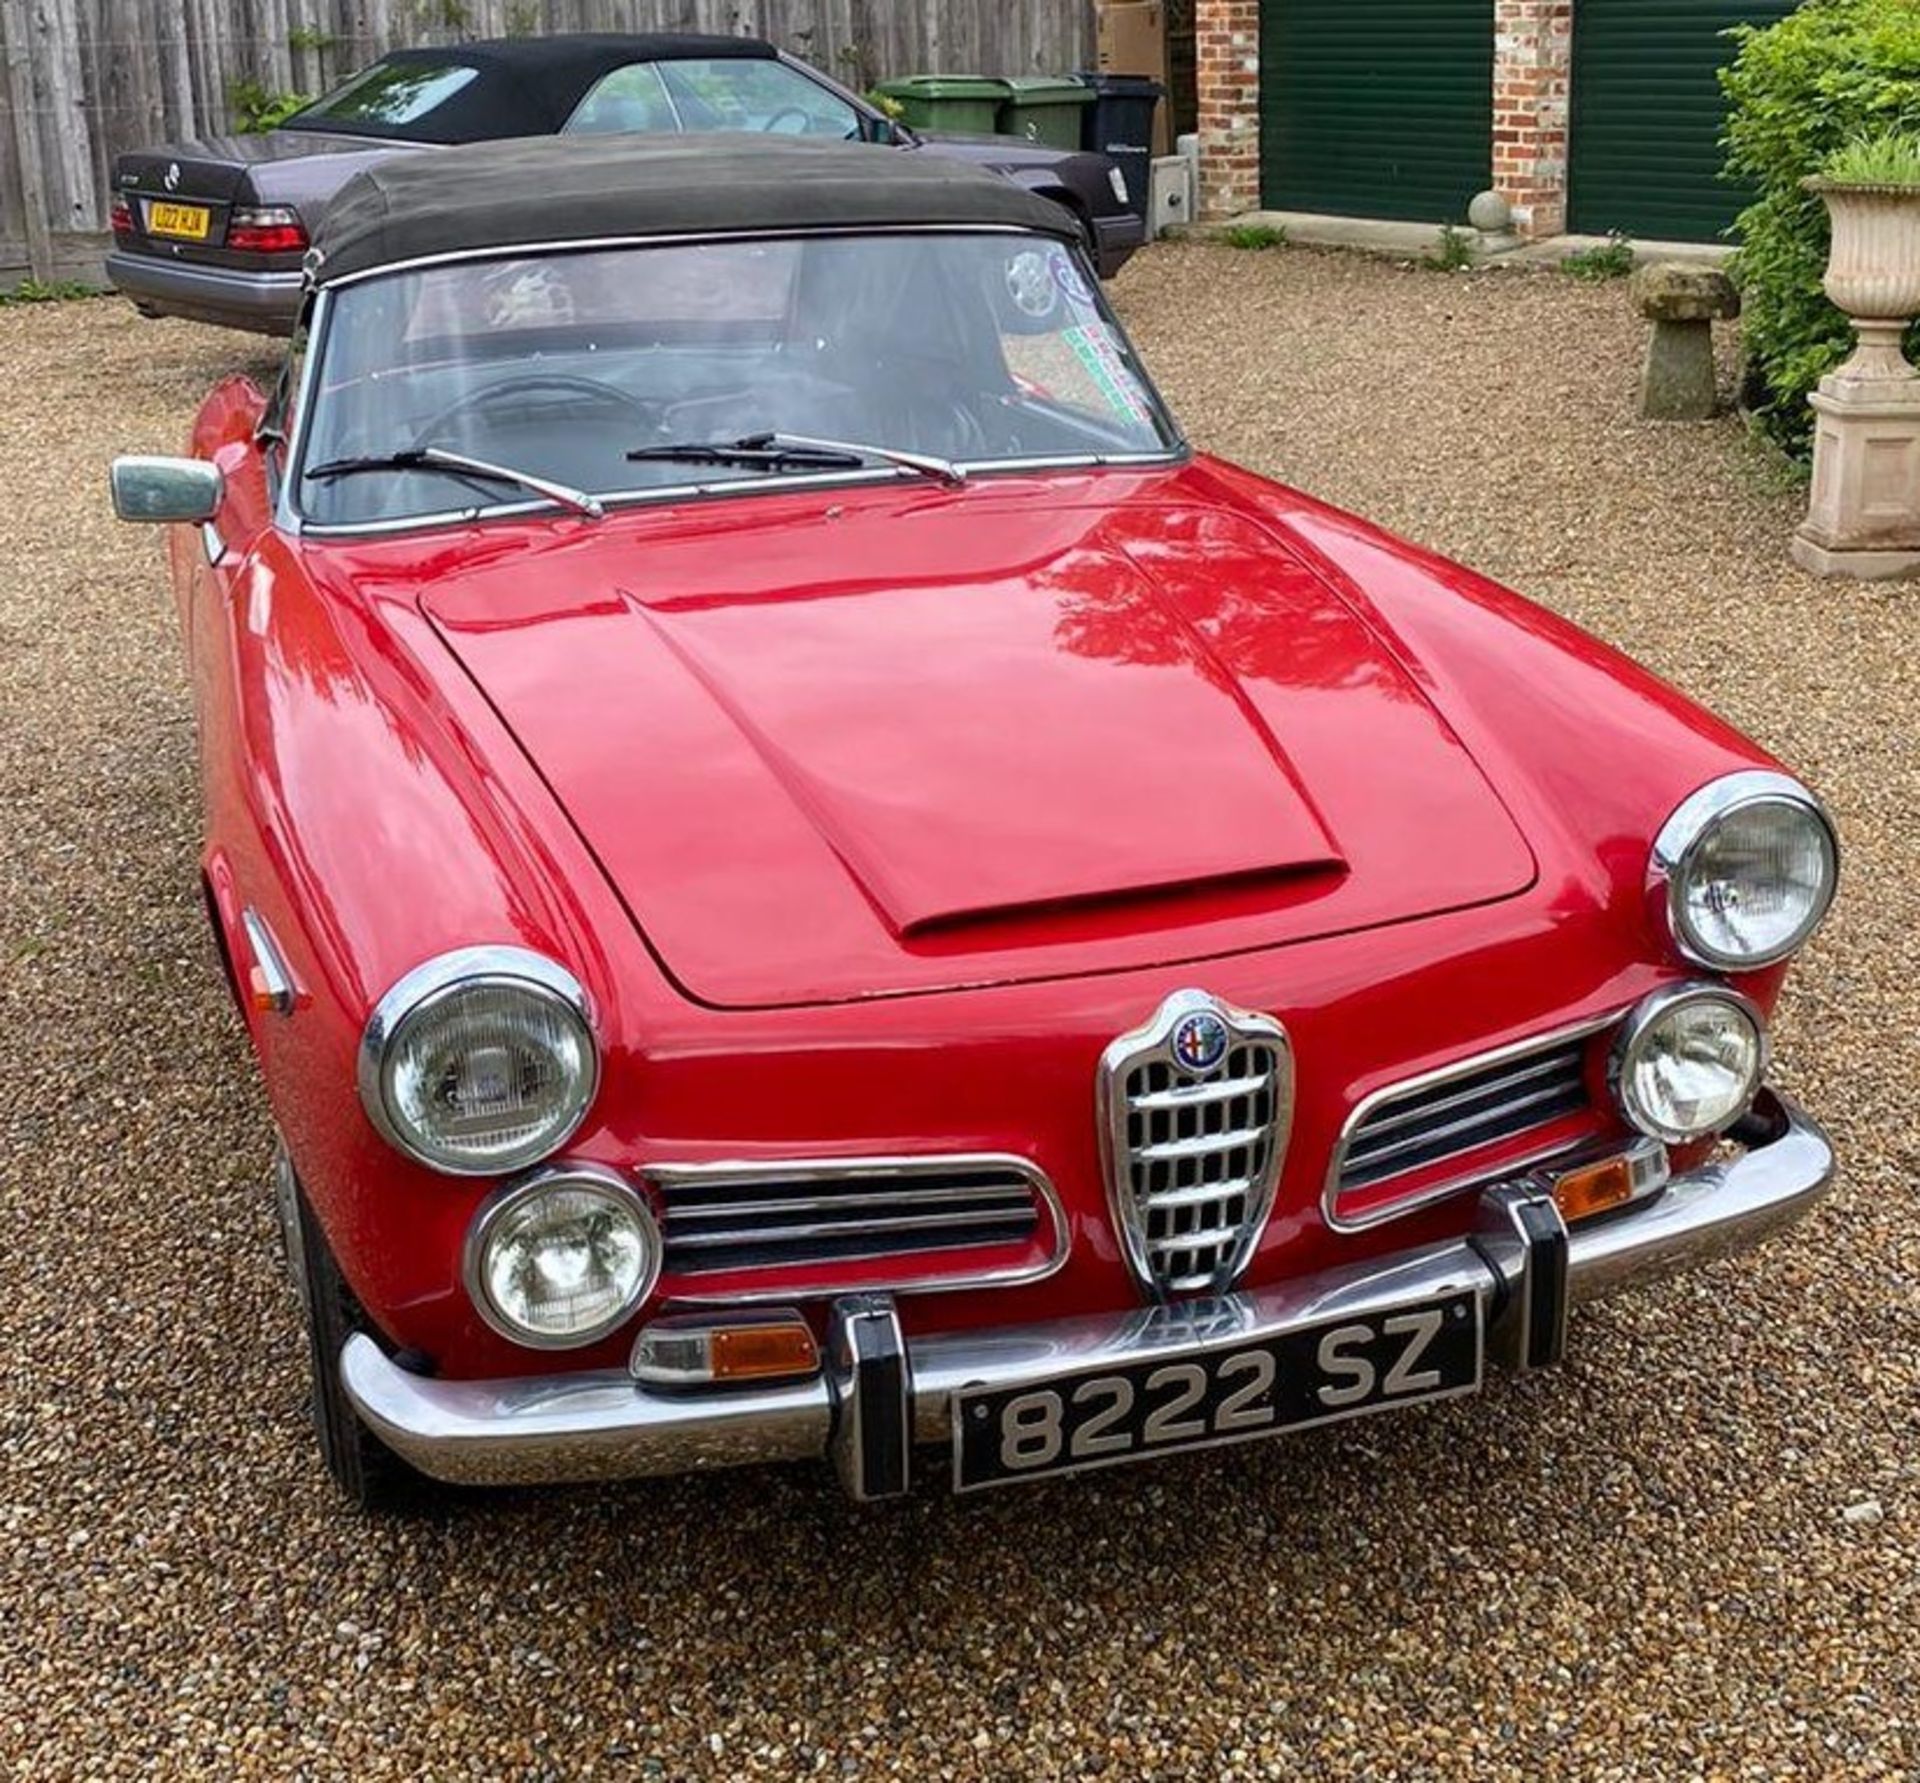 1963 Alfa Romeo 2600 Spider - First Registered 1967 - Image 8 of 25